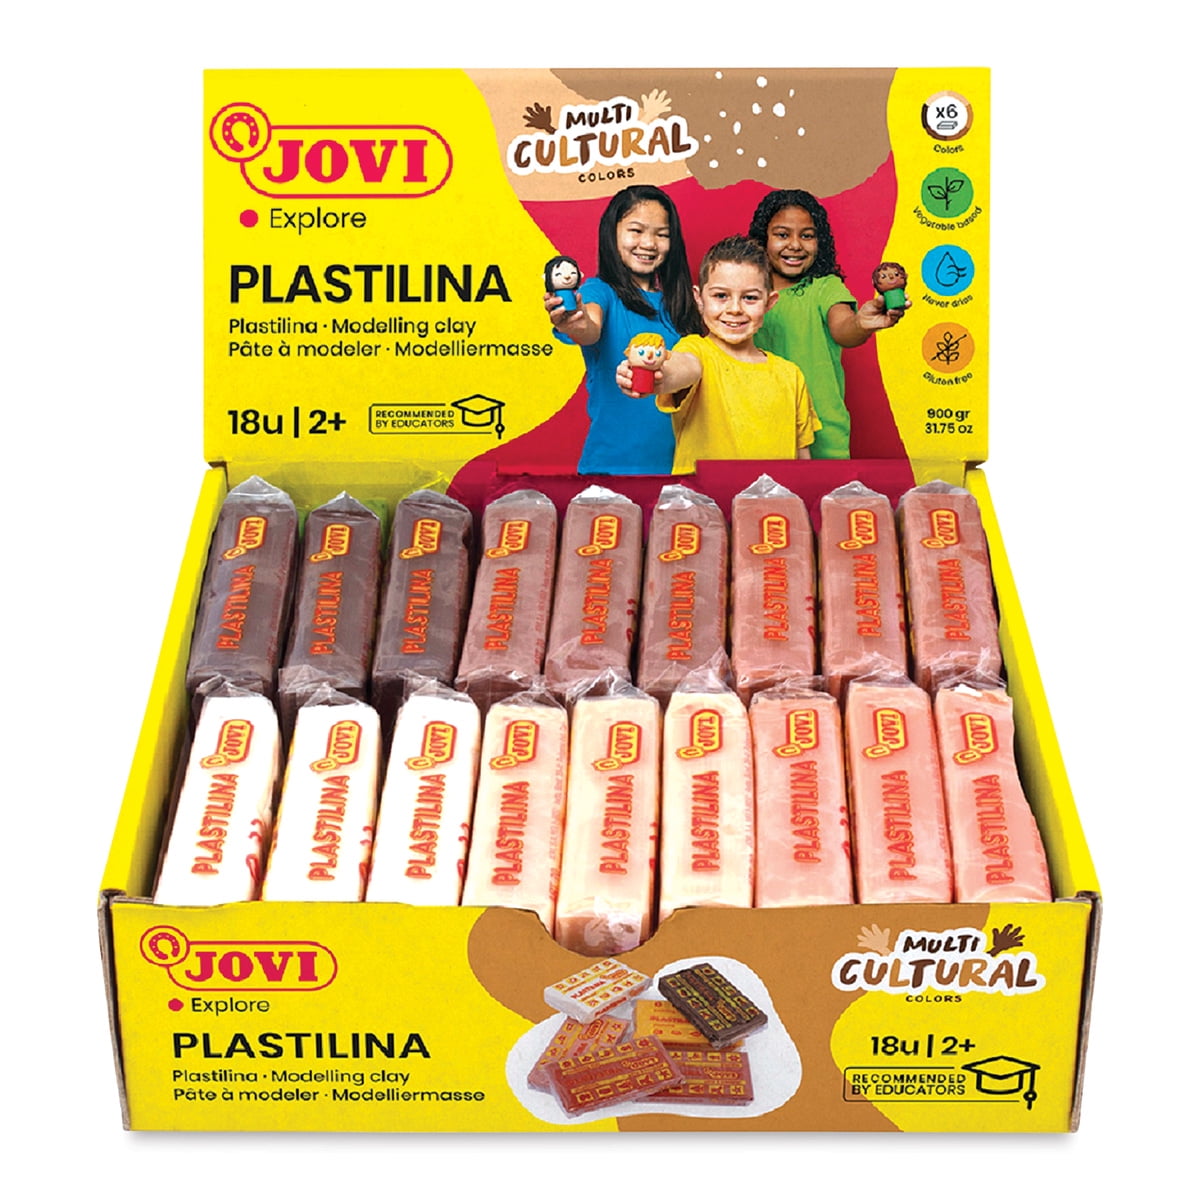 Jovi Plastilina 50g Soft Modelling Clay - Doesn't Dry Out